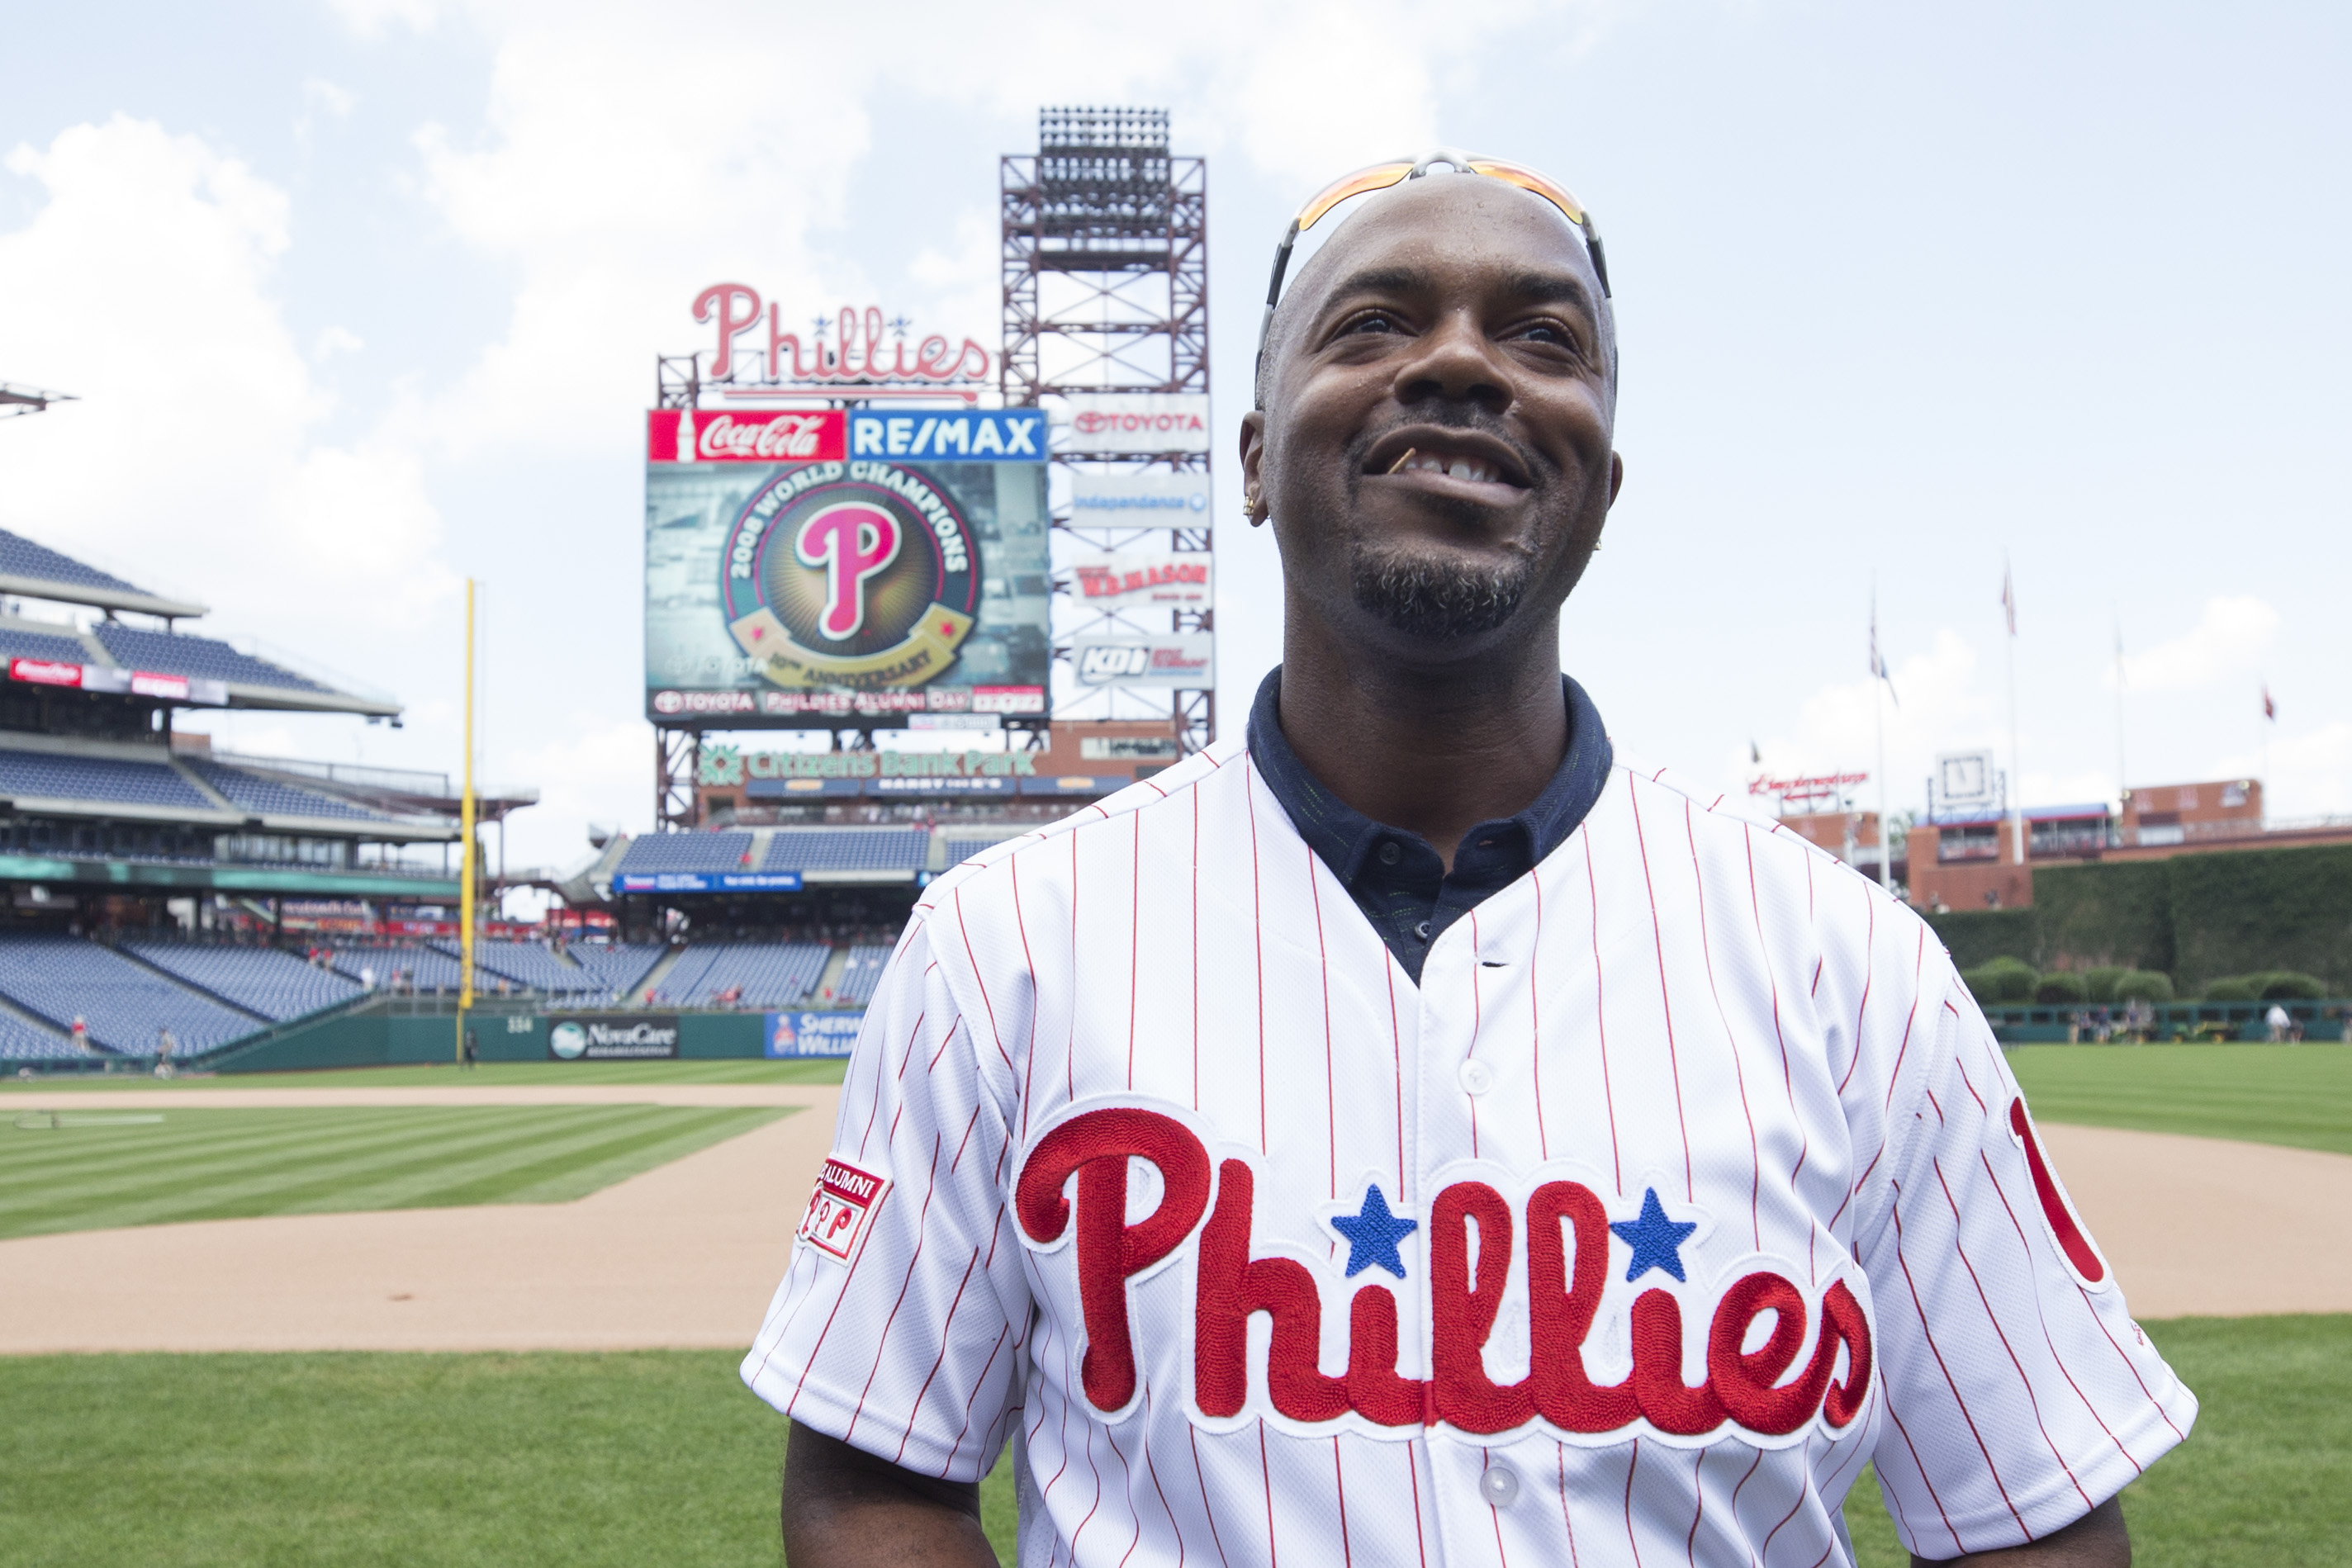 Phillies Hire Franchise Legend Jimmy Rollins As Special Advisor To President Of Baseball Operations